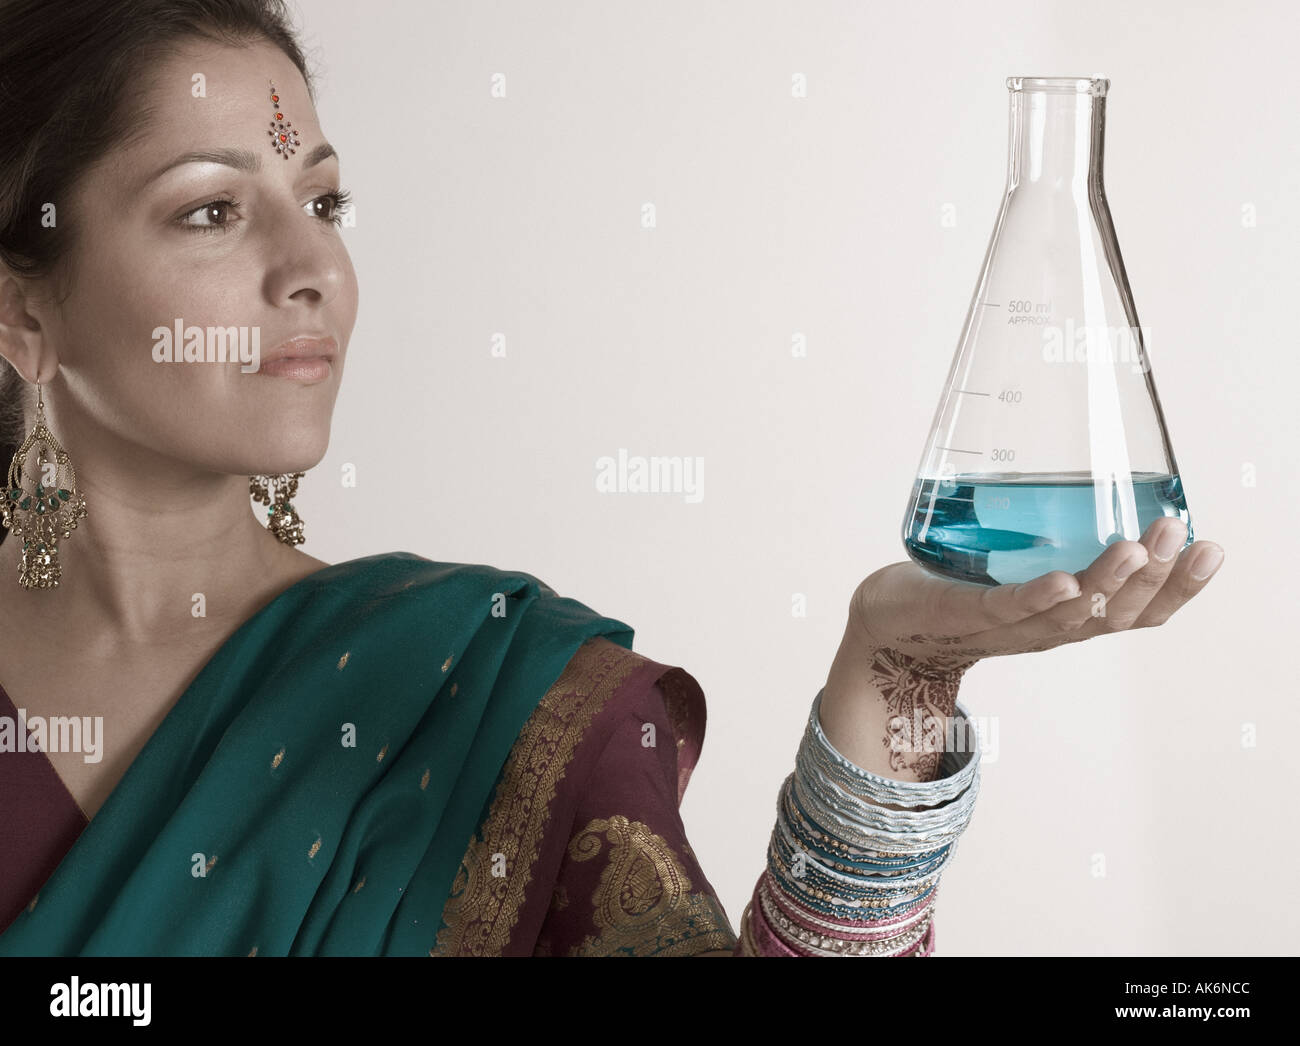 Young woman in traditional Indian dress holding a beaker Stock Photo